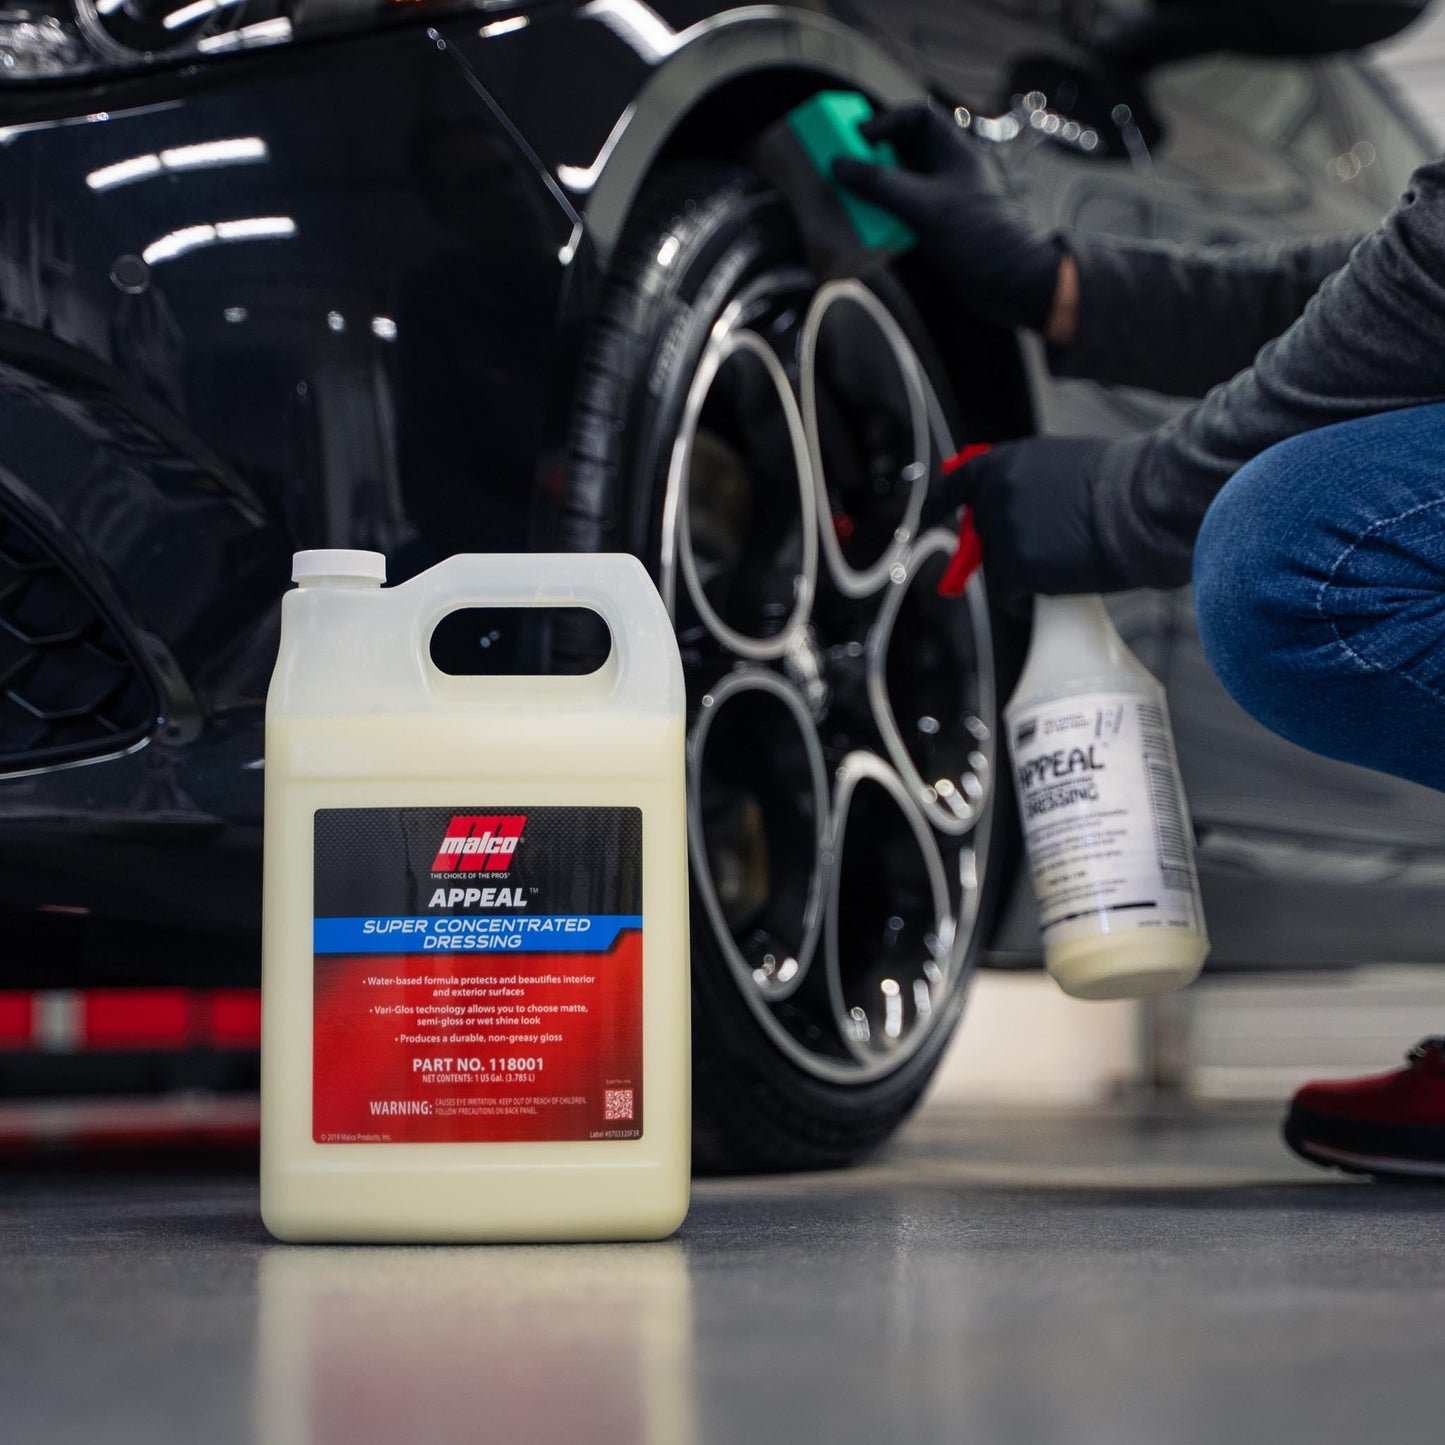 Malco Automotive Appeal™ Super Concentrated Dressing